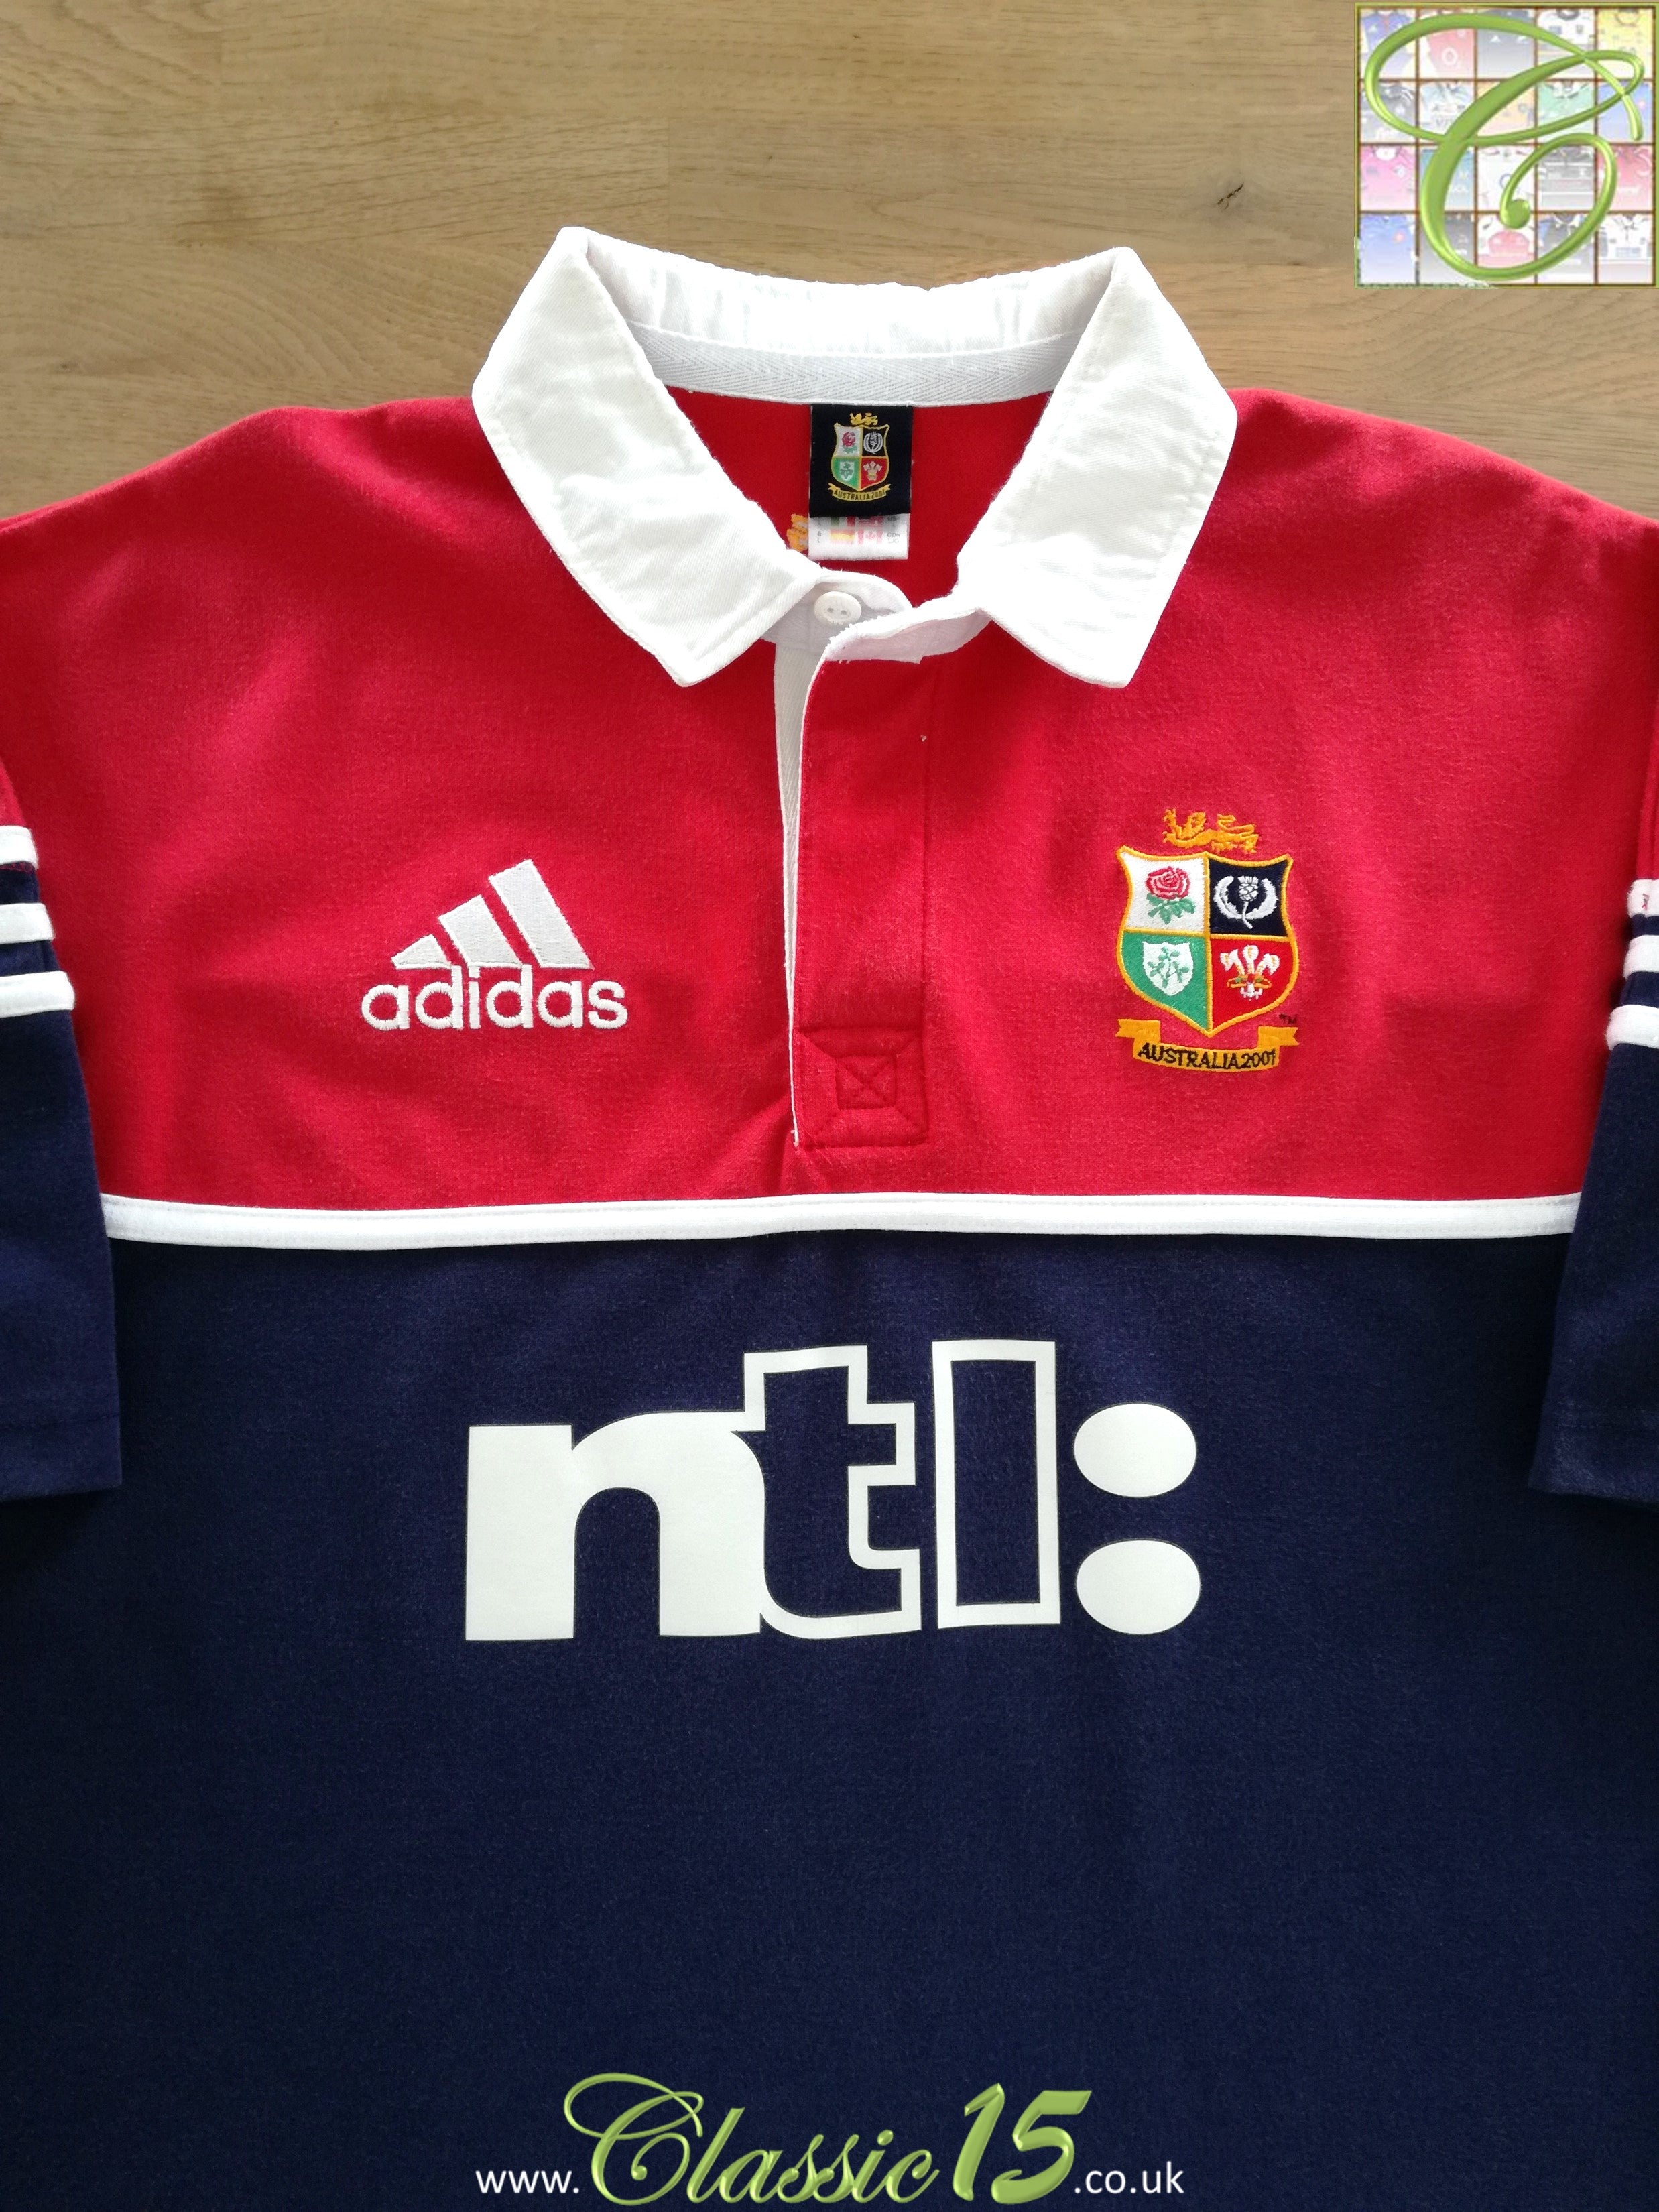 Classic Rugby Shirts | Vintage Rugby Shirts